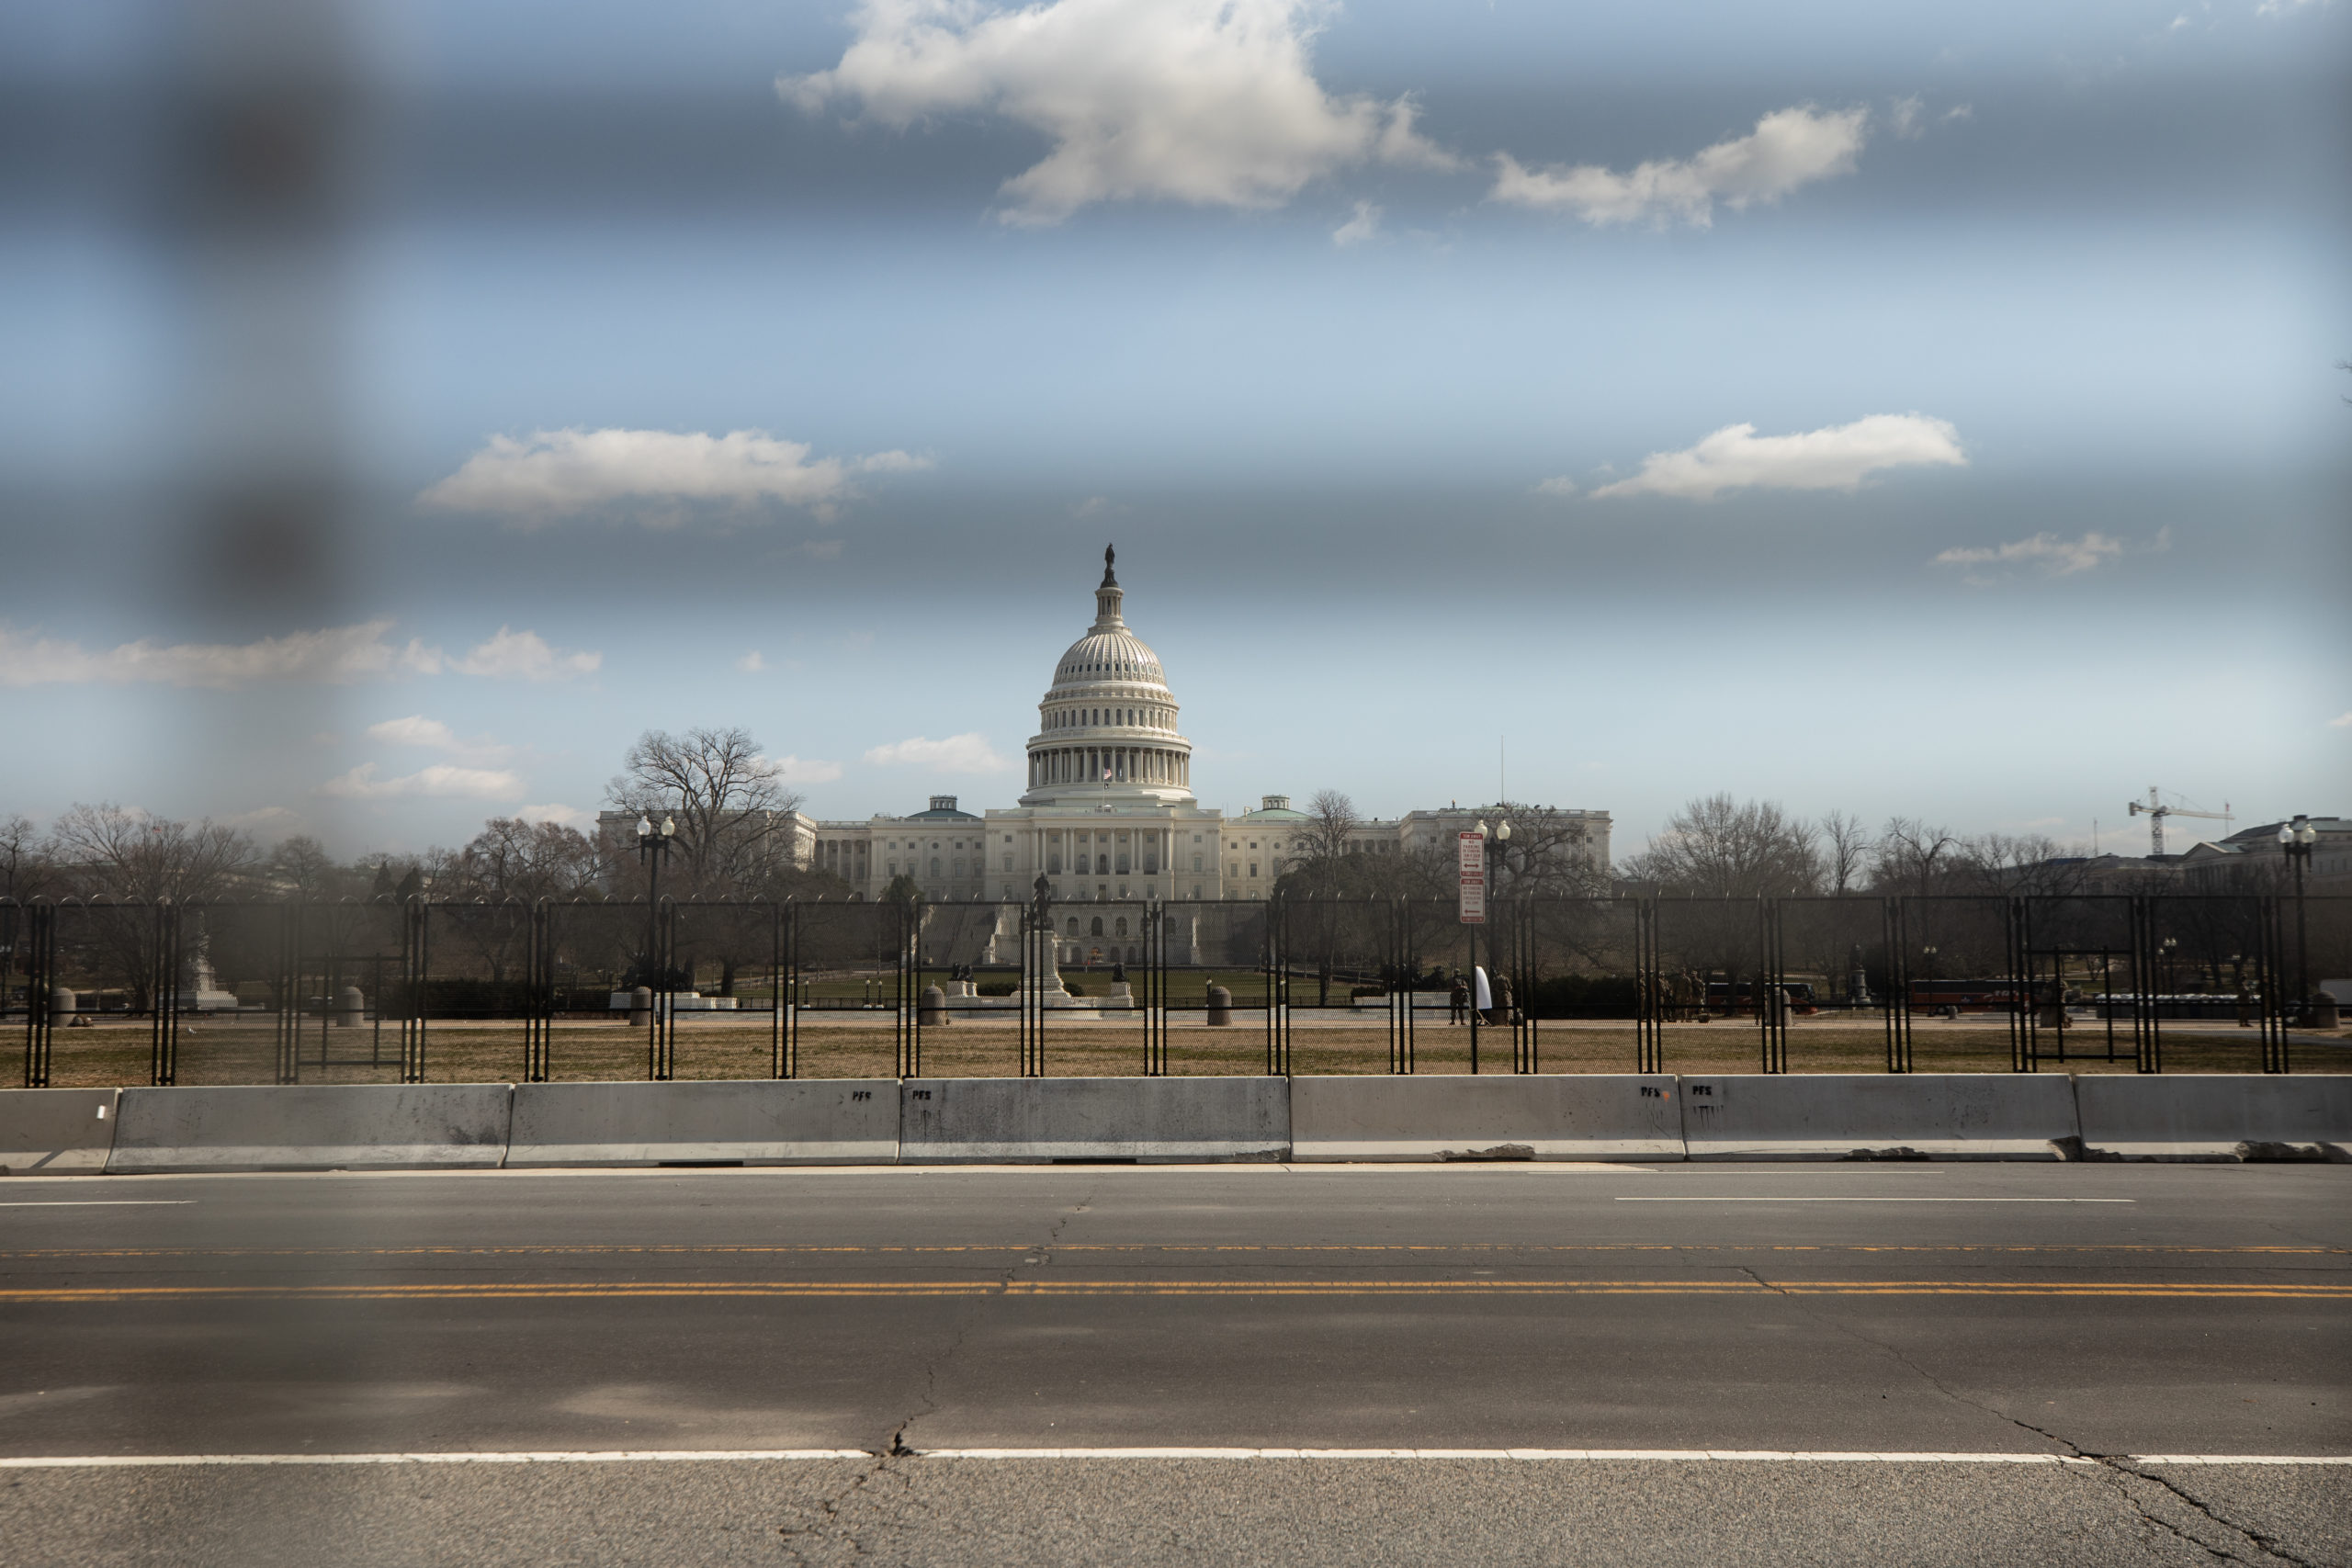 The National Guard maintained a heavy presence after a potential attack by an unnamed militia group was reported by the U.S. Capitol Police in Washington, D.C. on March 4, 2021. (Kaylee Greenlee - Daily Caller News Foundation)